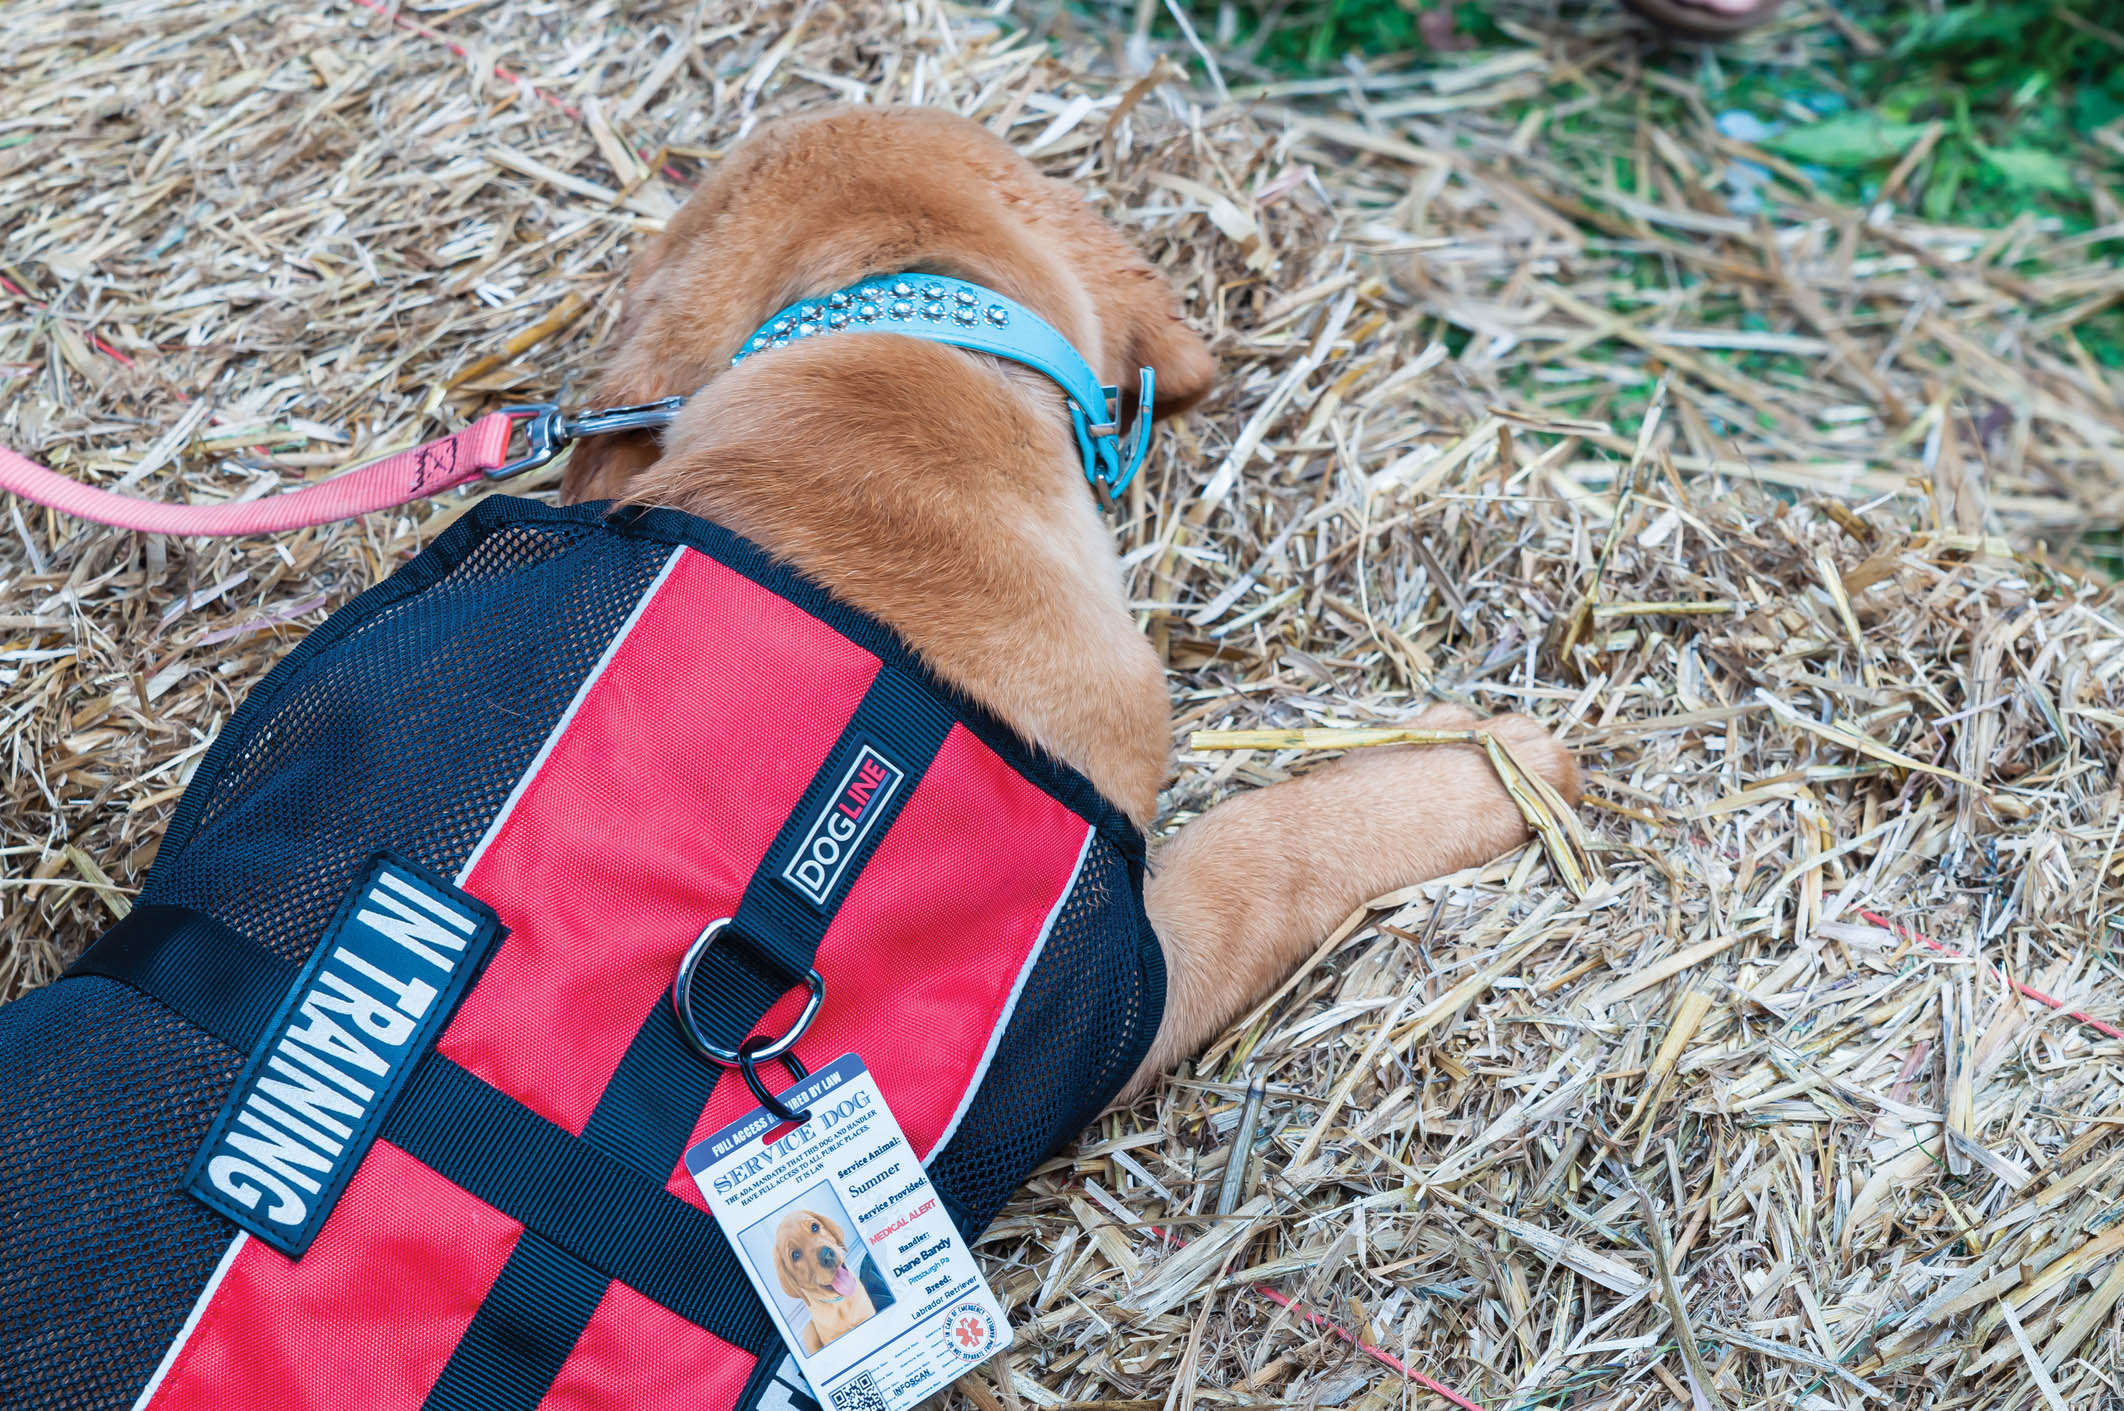 A puppy service dog in training sleeping on a bale of hay in summer time.